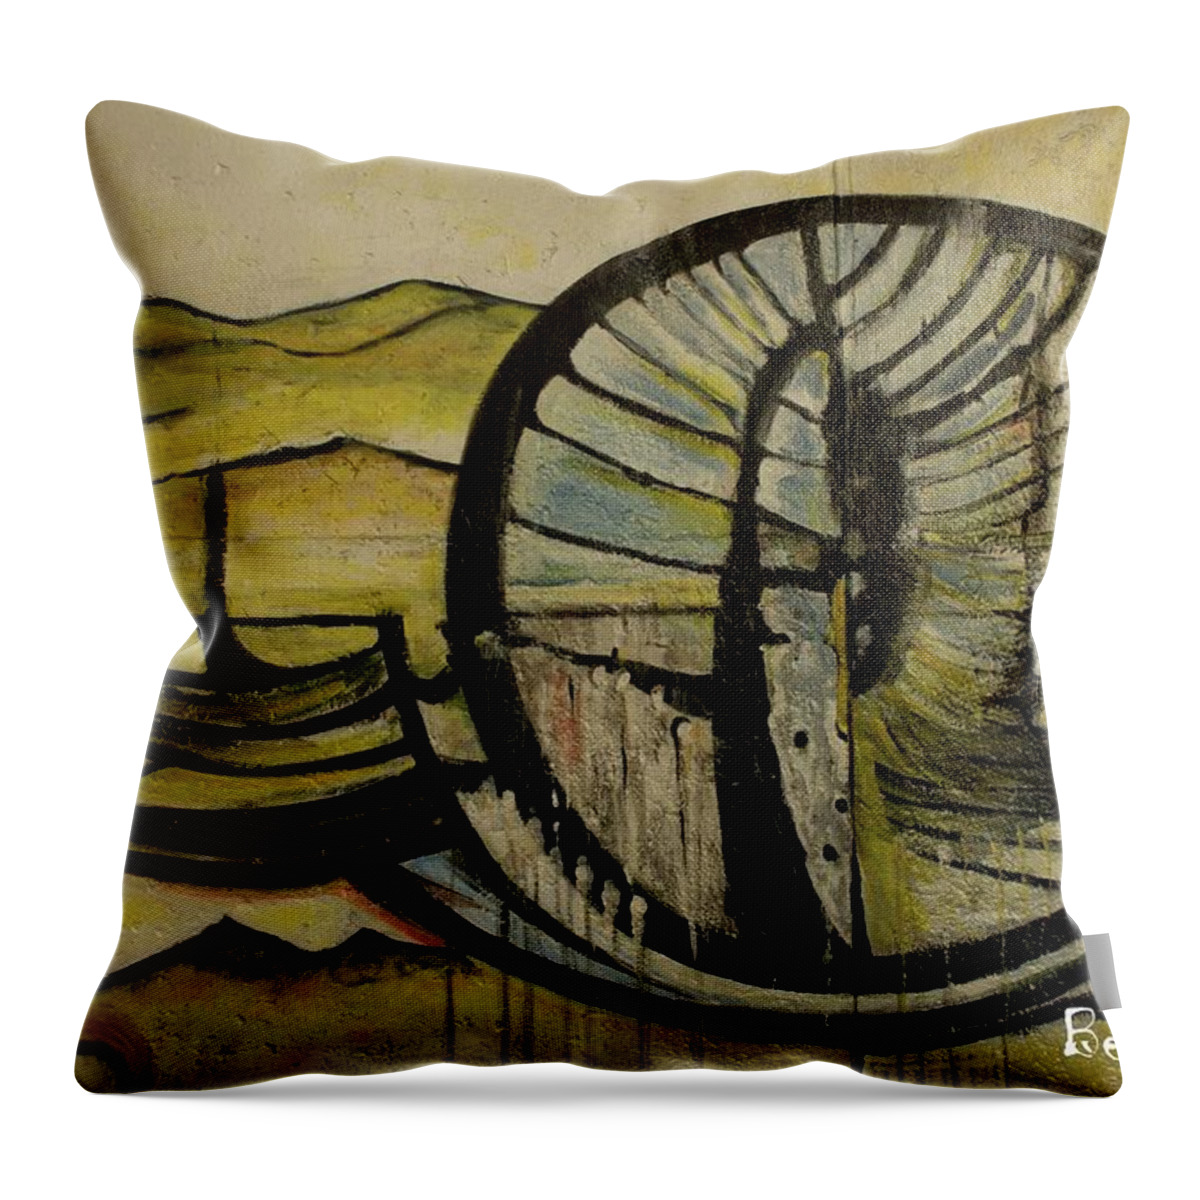 Germany Throw Pillow featuring the photograph Berlin Wall #62 by Robert Grac